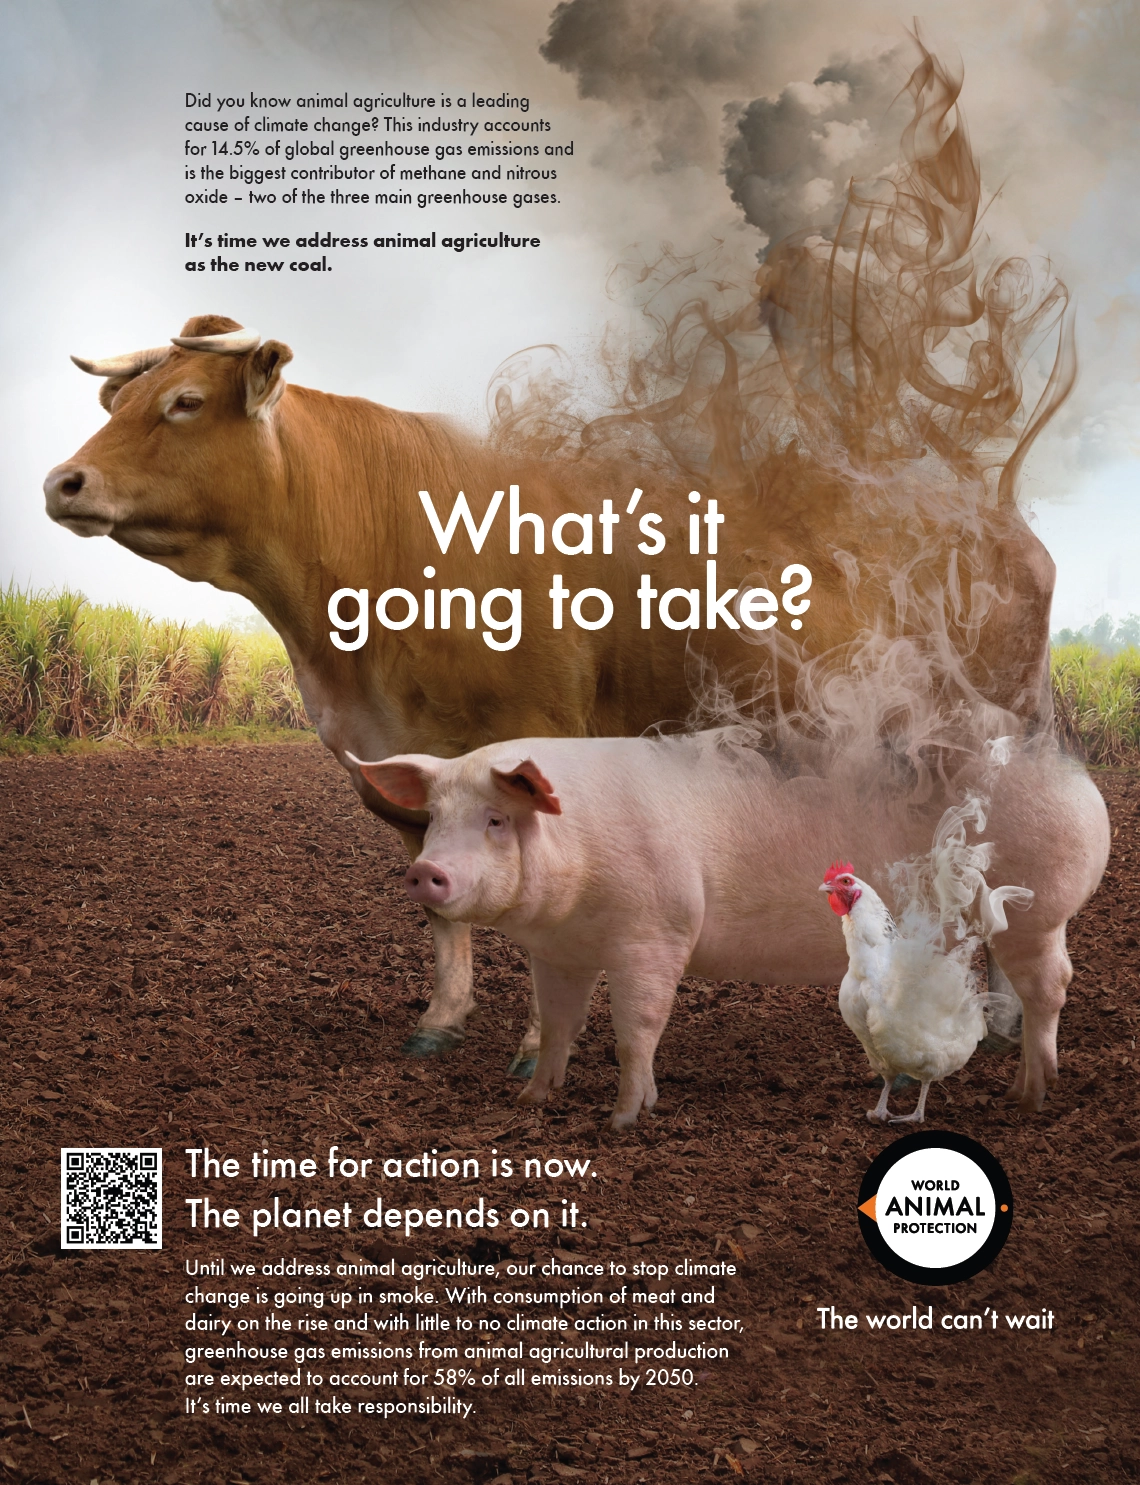 What's it going to take? It’s time we address animal agriculture as the new coal.